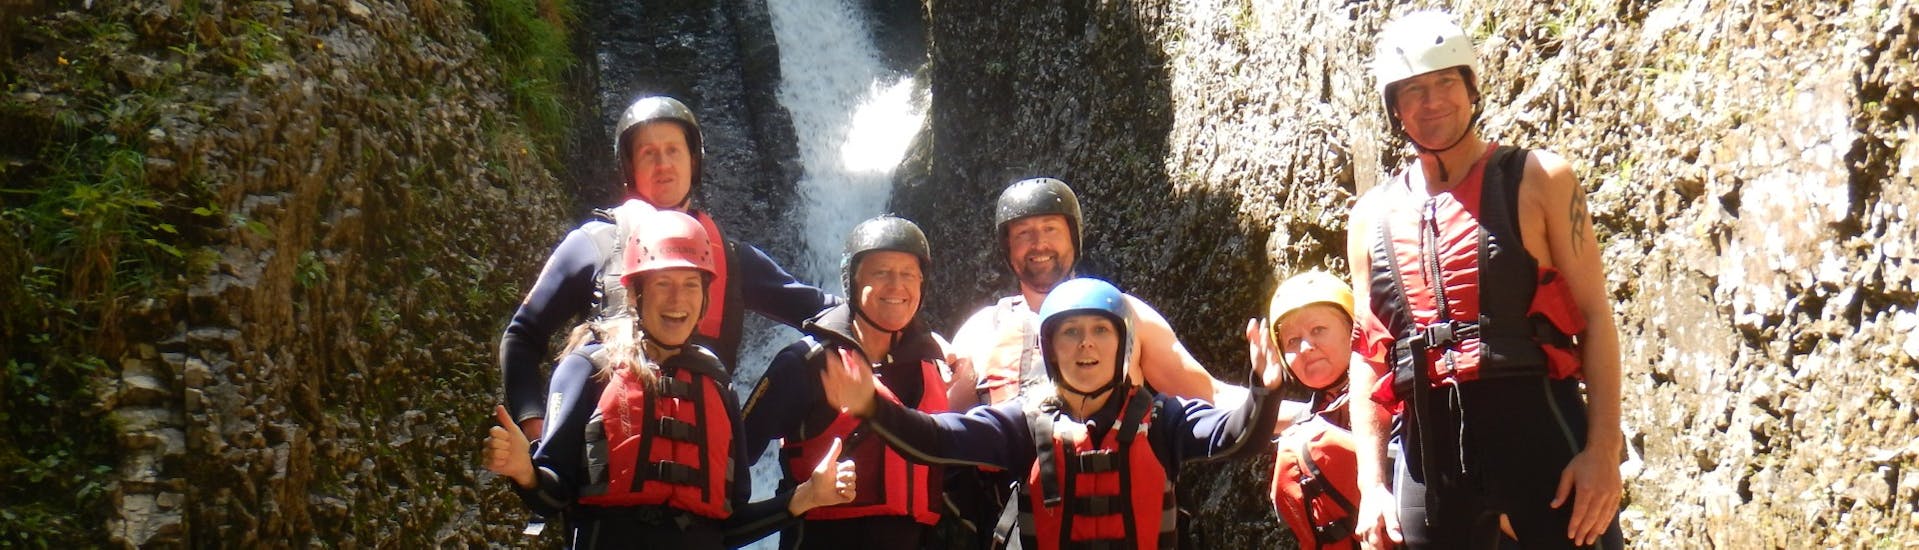 A group of friends smiling into the camera at the end of their Rafting & Canyoning Tour Kitzbüheler Ache with Outdoor Guide Kaiserwinkl.